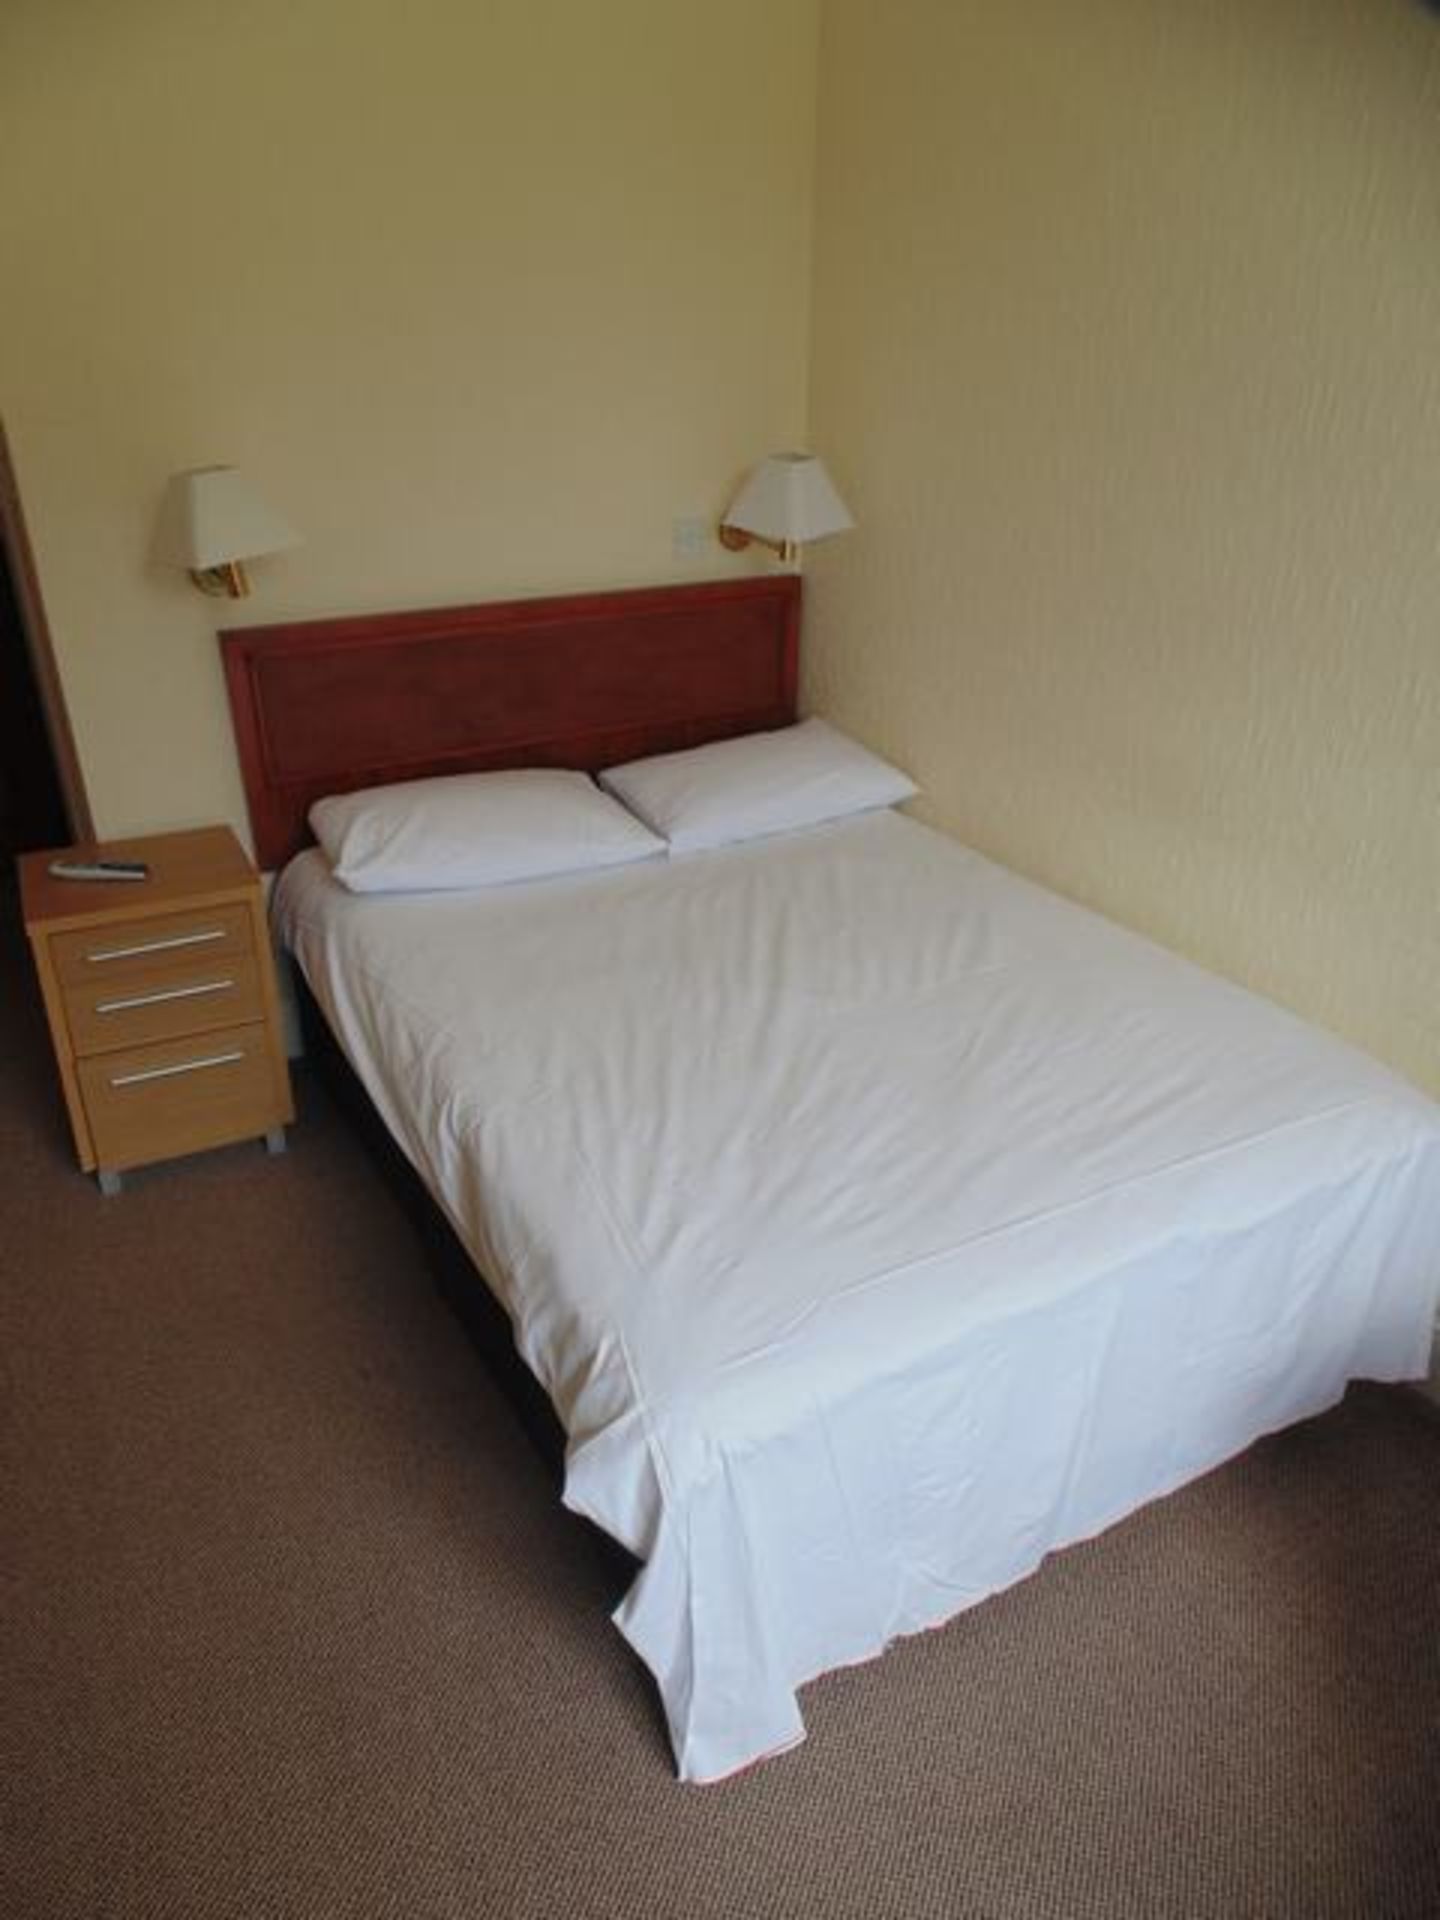 Content of Room 20  comprising of double bed and headboard, nightstand, wardrobe, desk and chair,